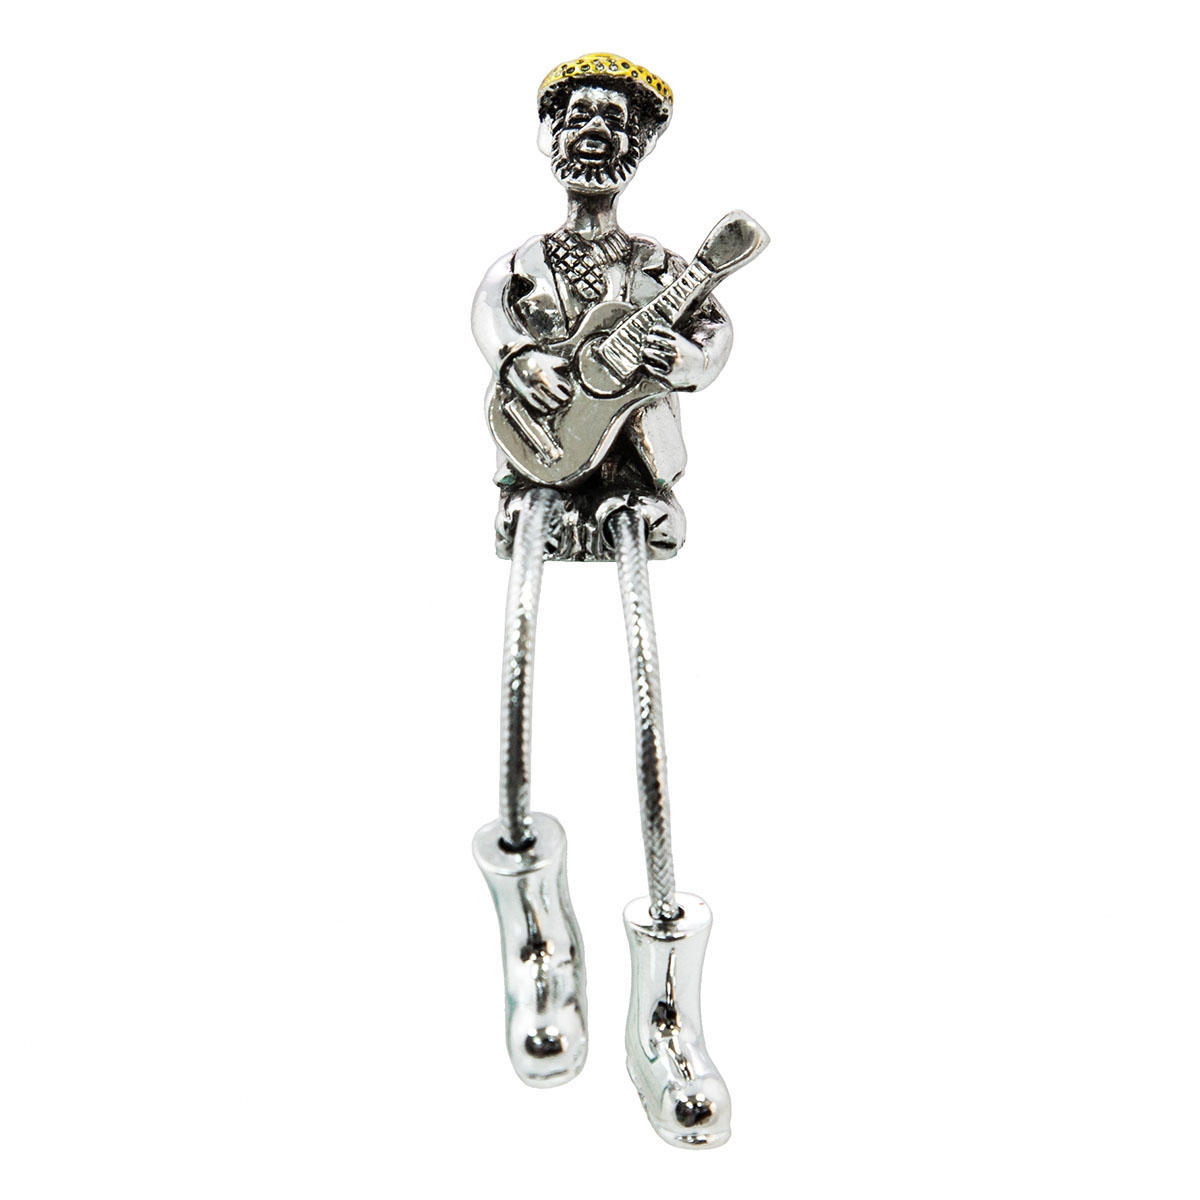 Silver-Plated Shelf Guitar Figurine with String Legs - 1